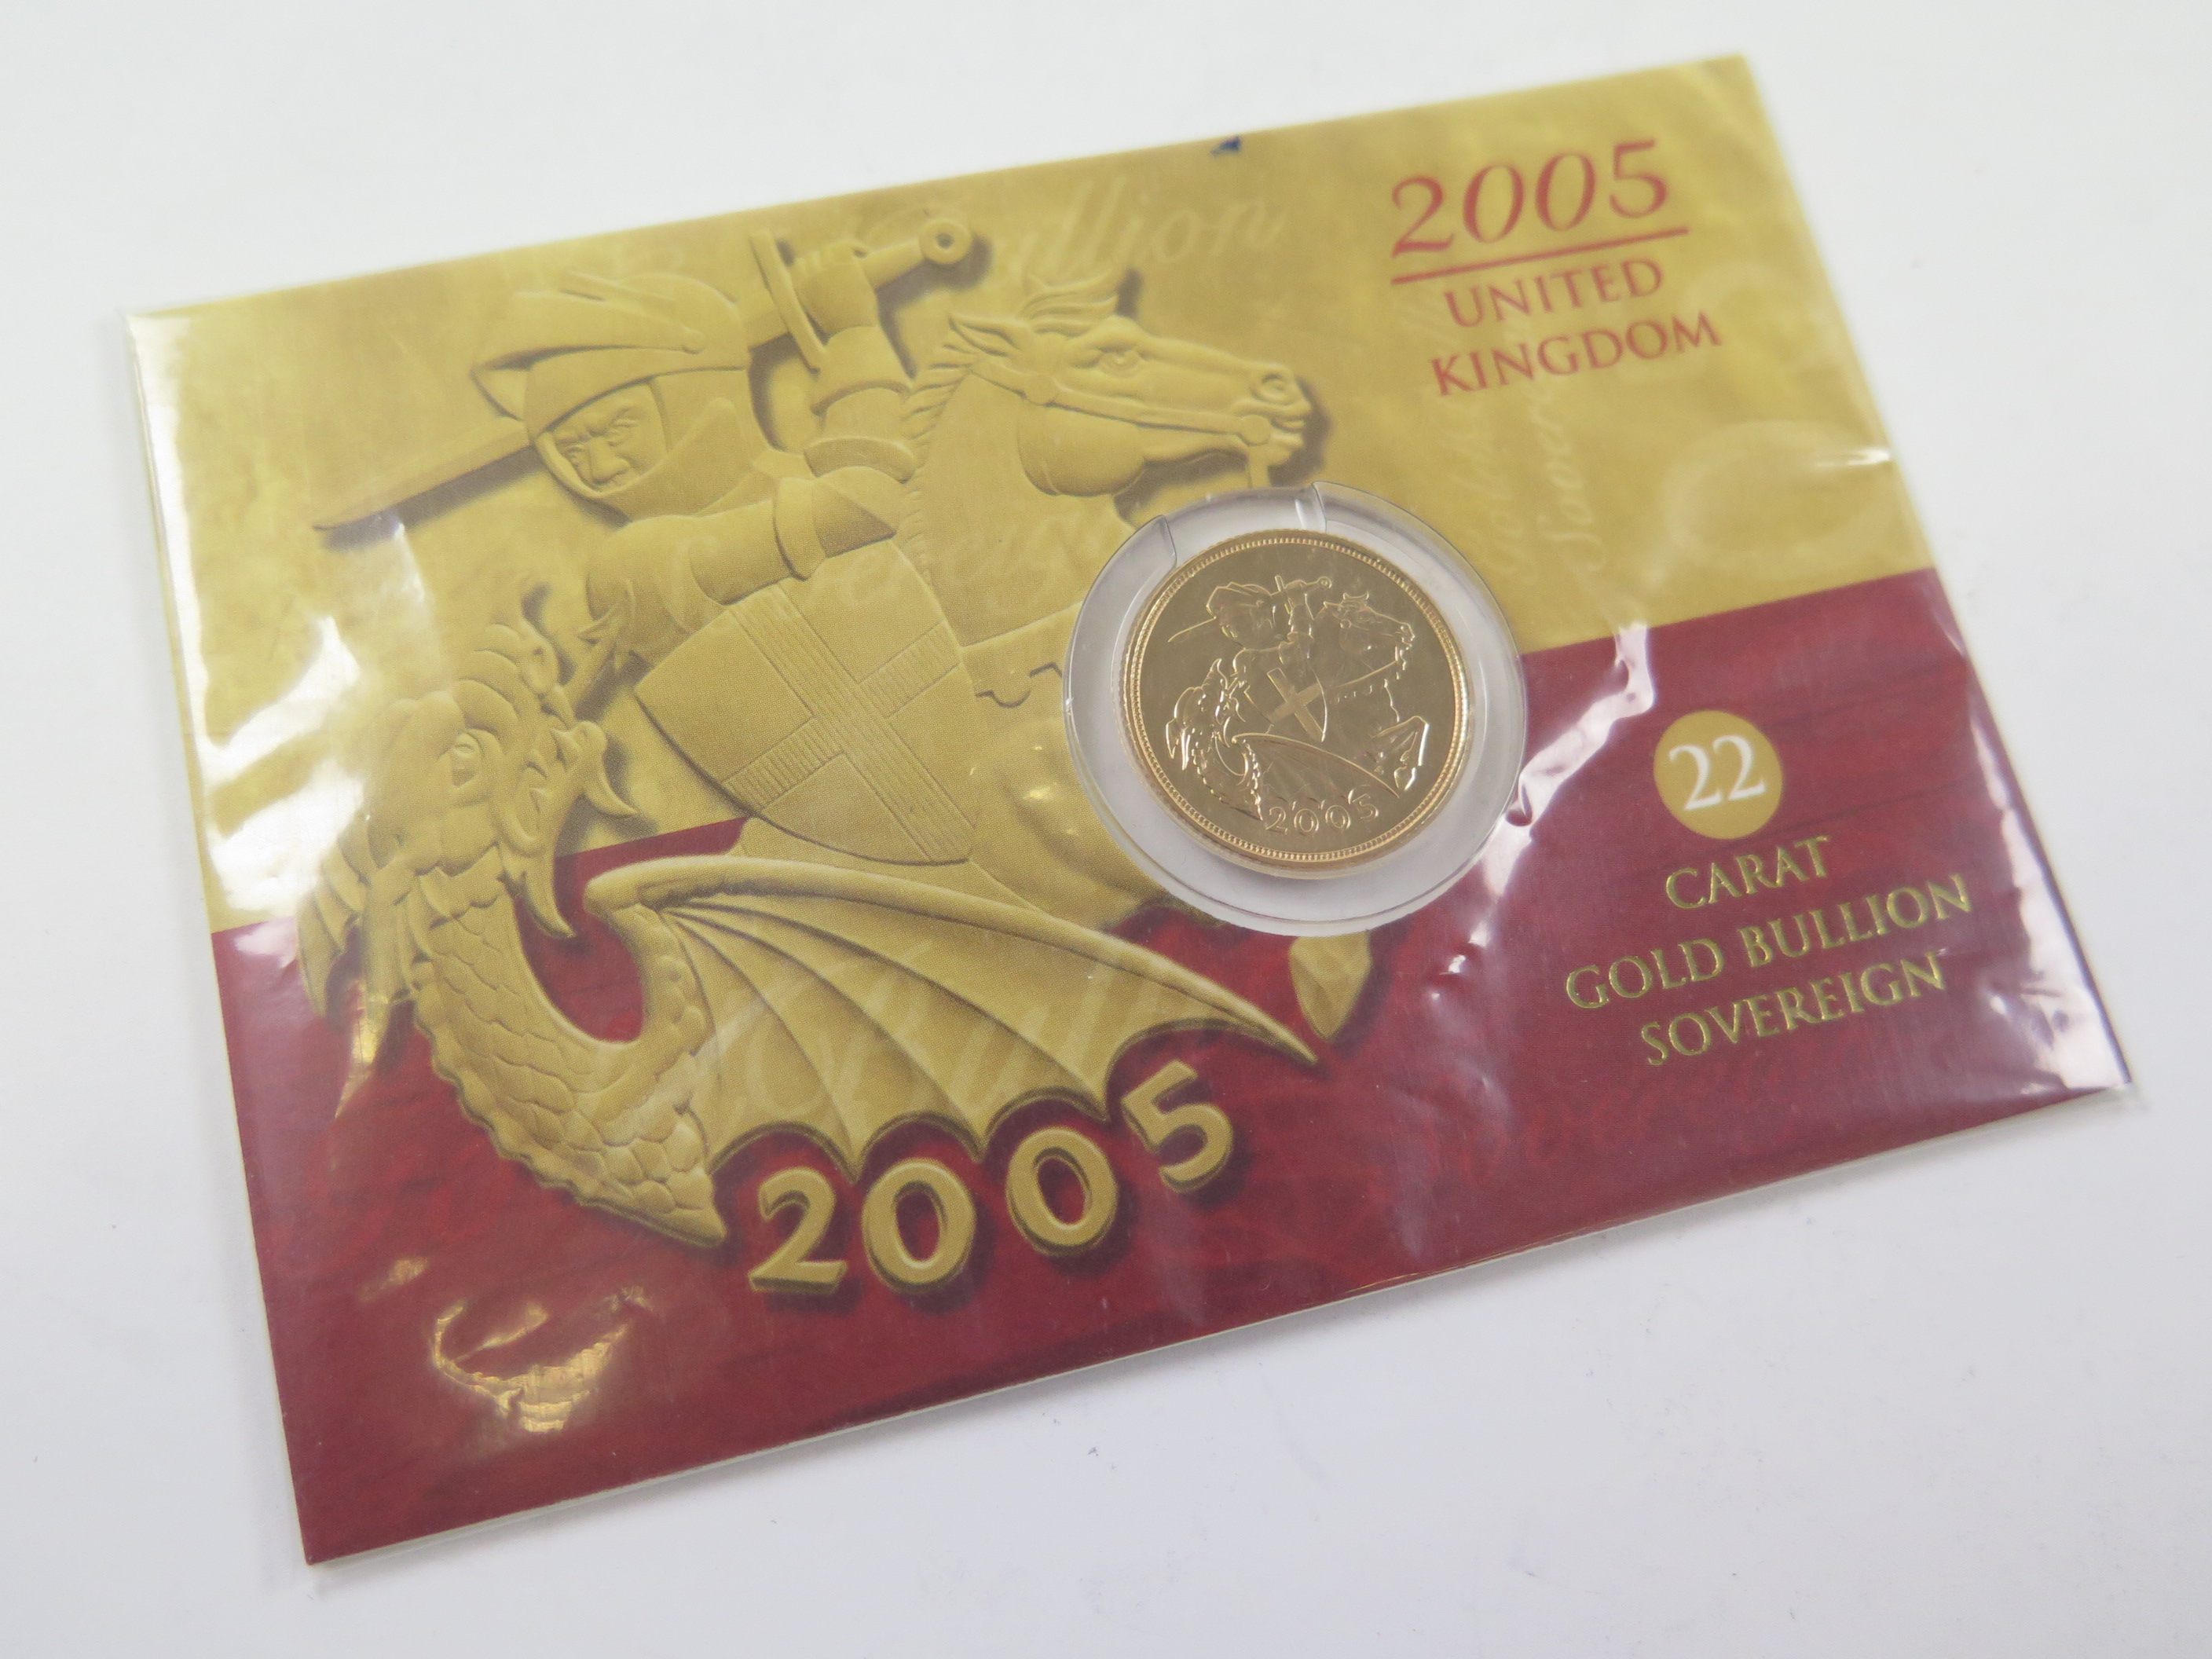 Sovereign 2005 BU in the "Royal Mint" card